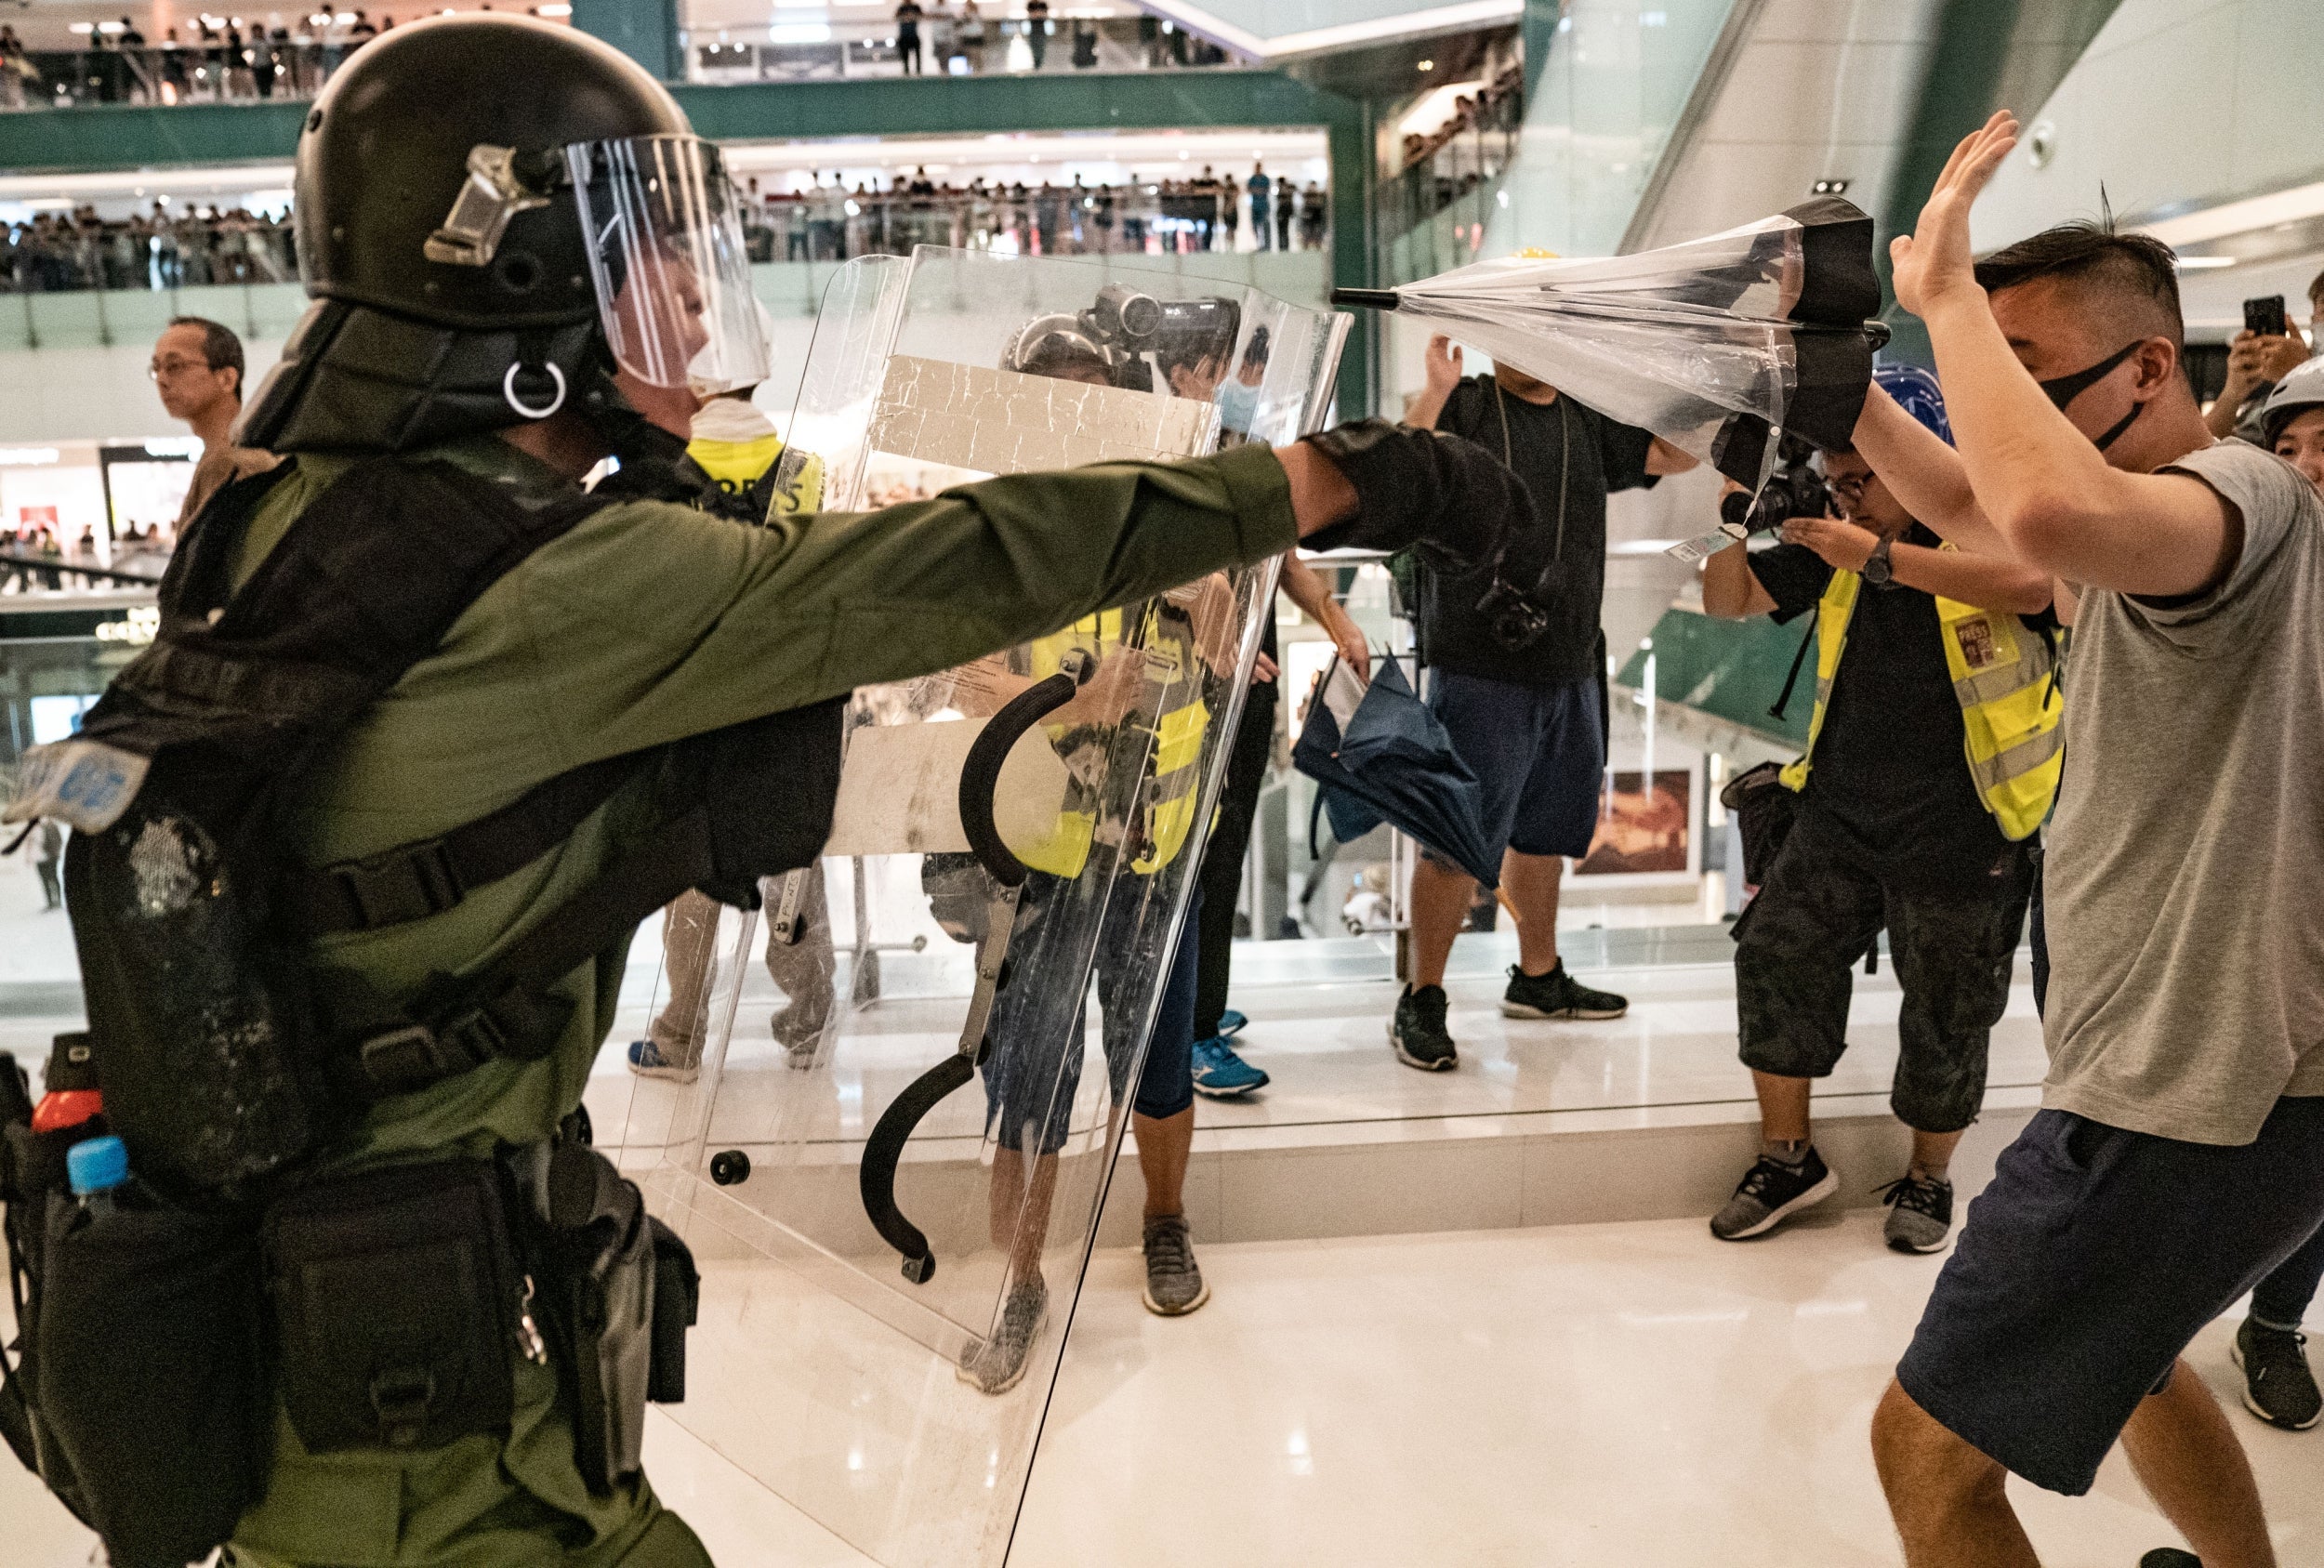 Riot police chase protesters through a shopping mall as they clashed on Sunday